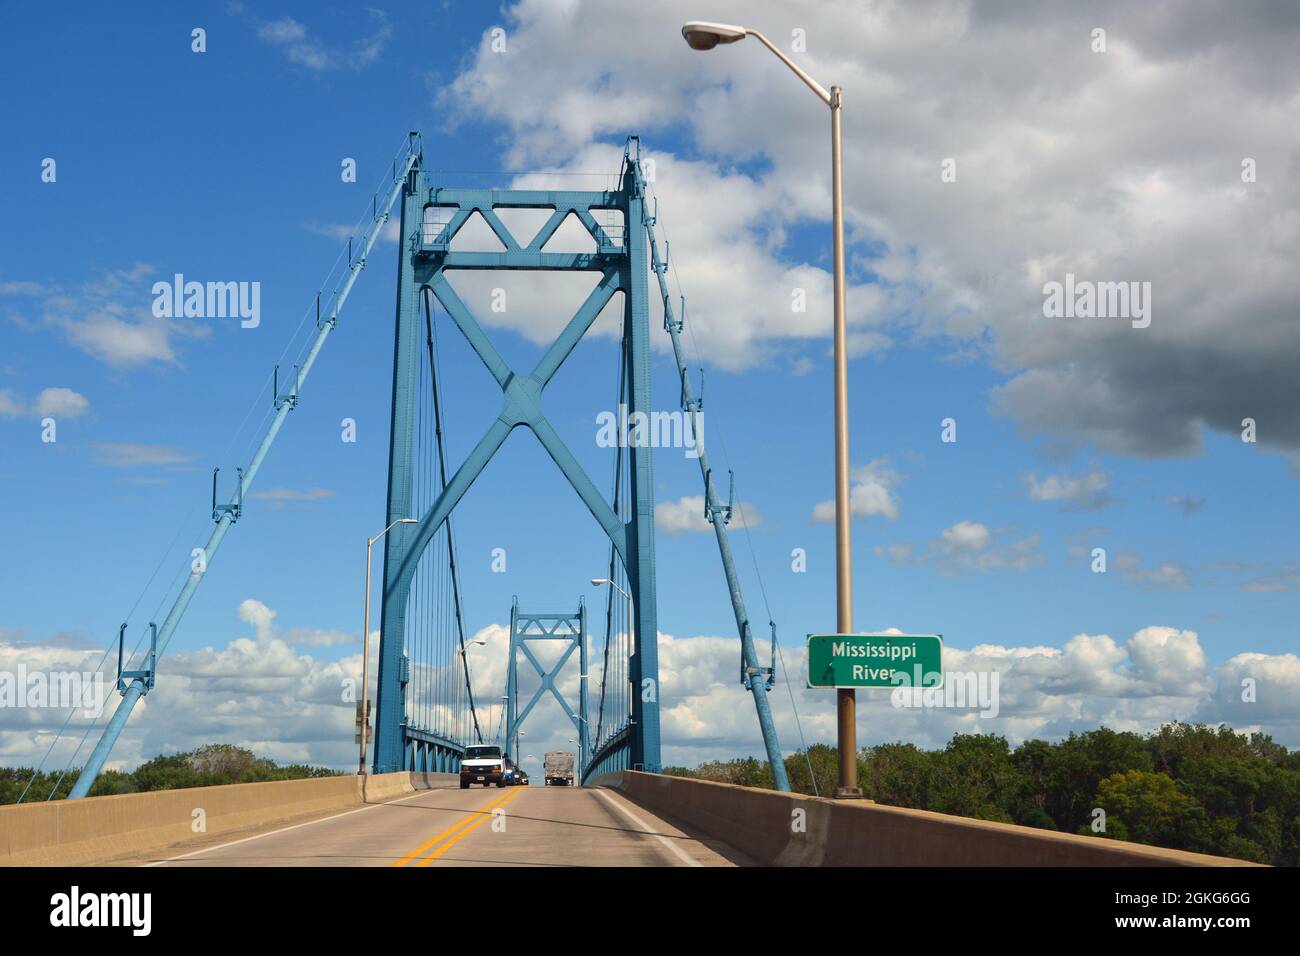 The US Route 30 Gateway Bridge over the Mississippi River opened in 1956 carries traffic between Clinton, Iowa and Fulton, Illinois. Stock Photo